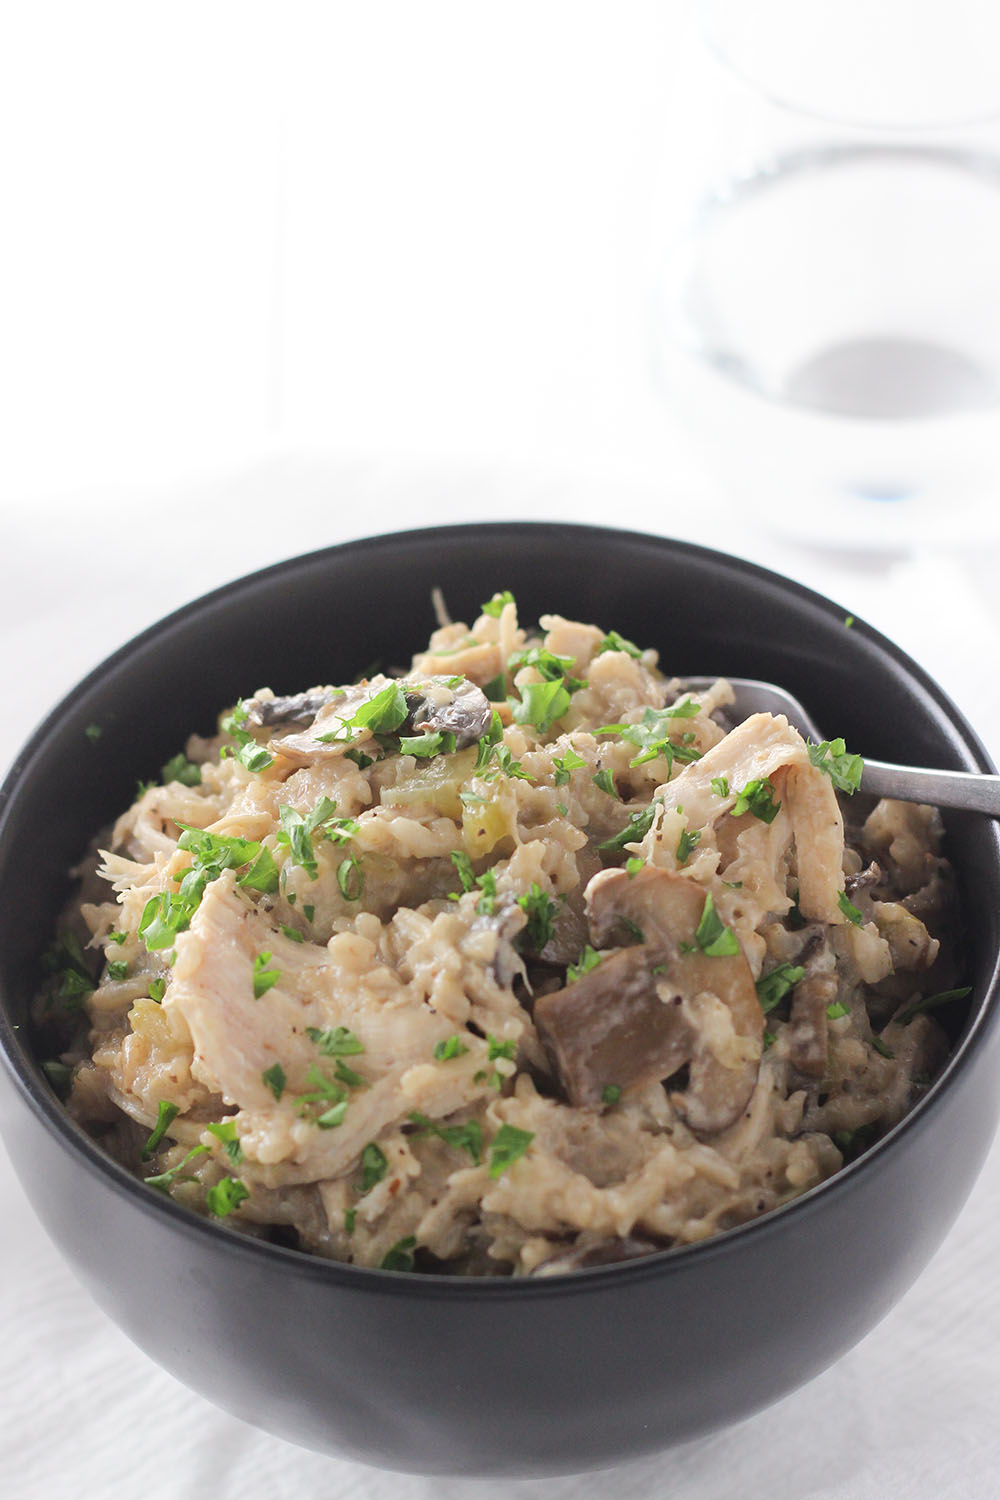 A black bowl is full of creamy instant pot chicken and rice. You can see slices of mushrooms and shredded chicken.